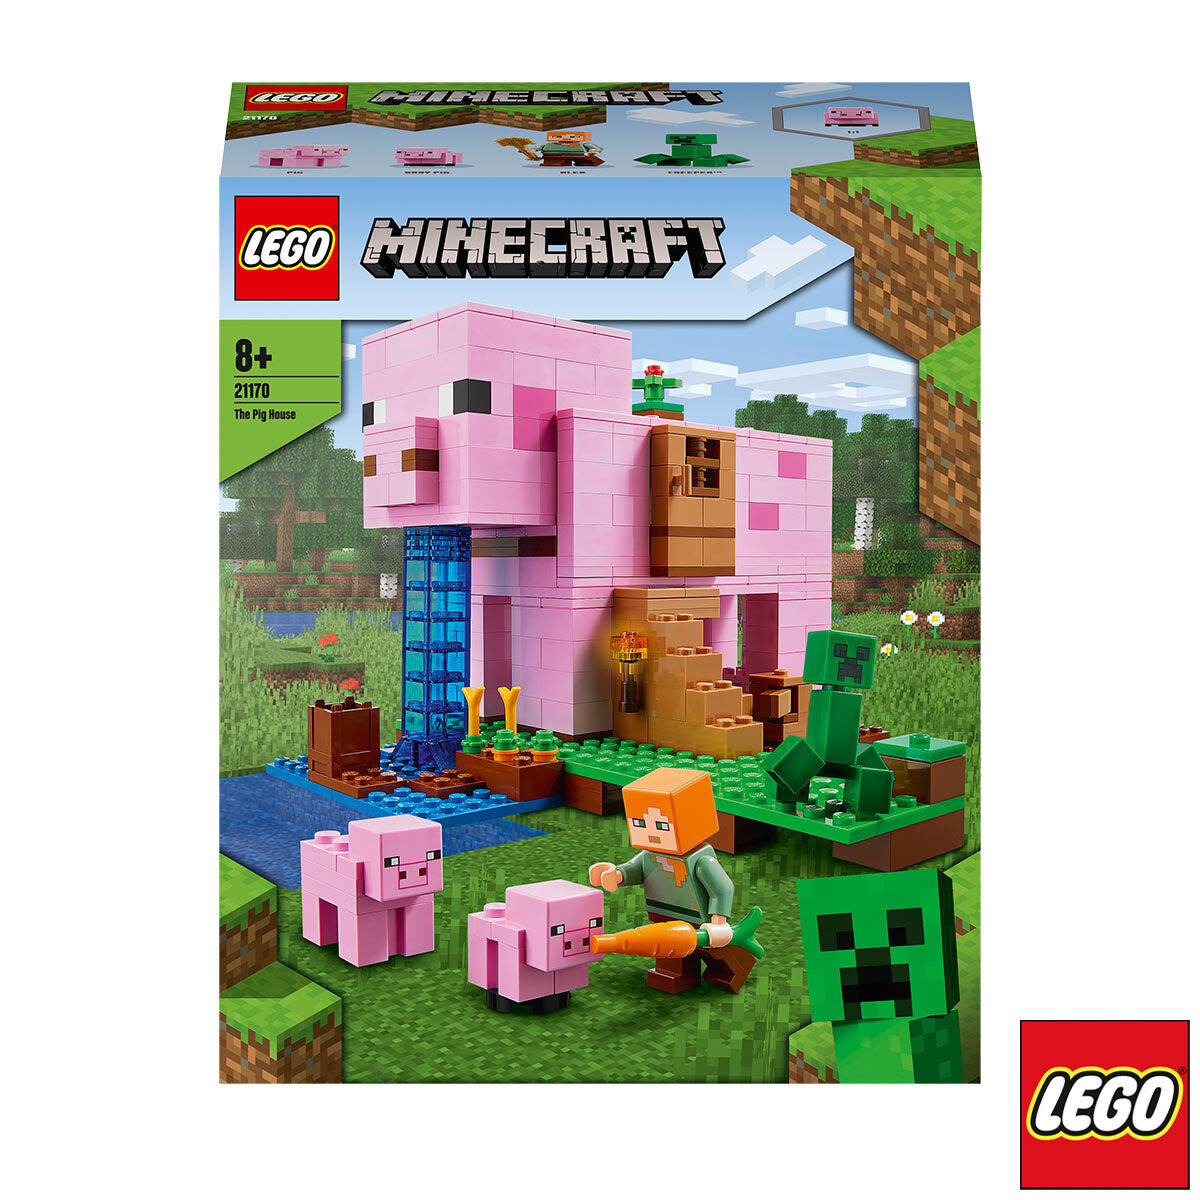 LEGO Minecraft The Pig House - Model 21170 (8+ Years) | C...